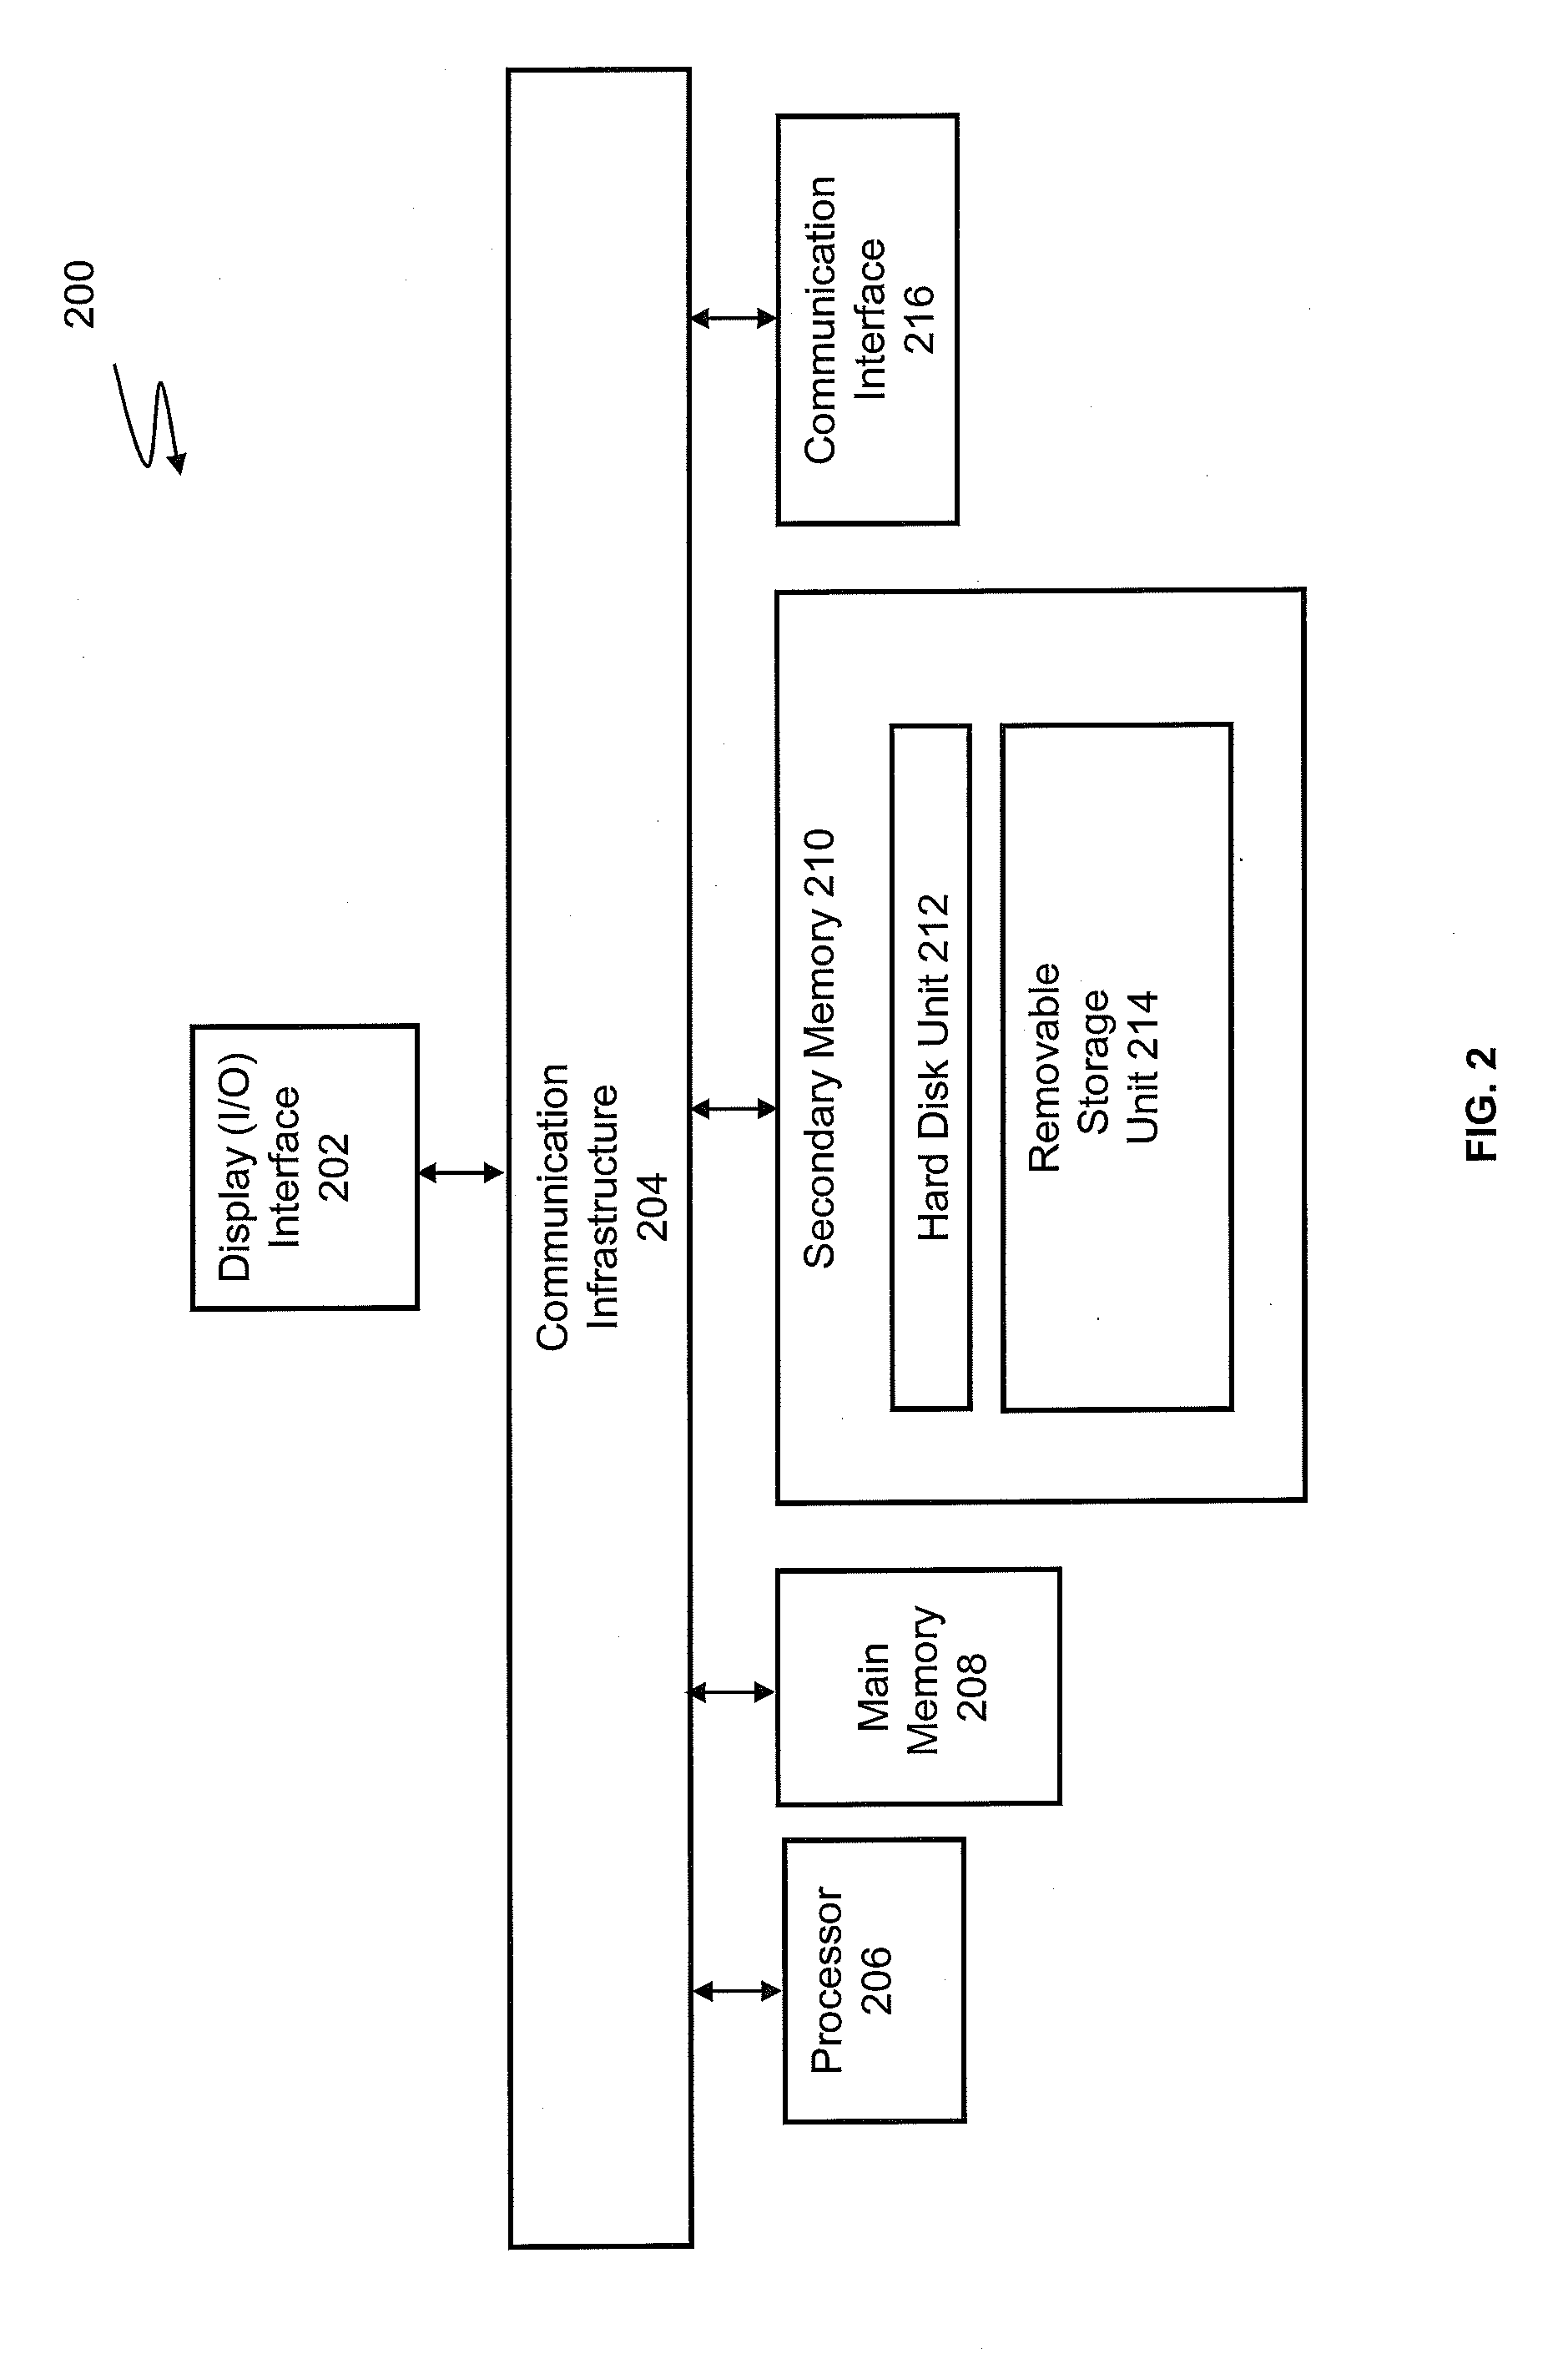 Social network driven system and methods for environmental planning and design